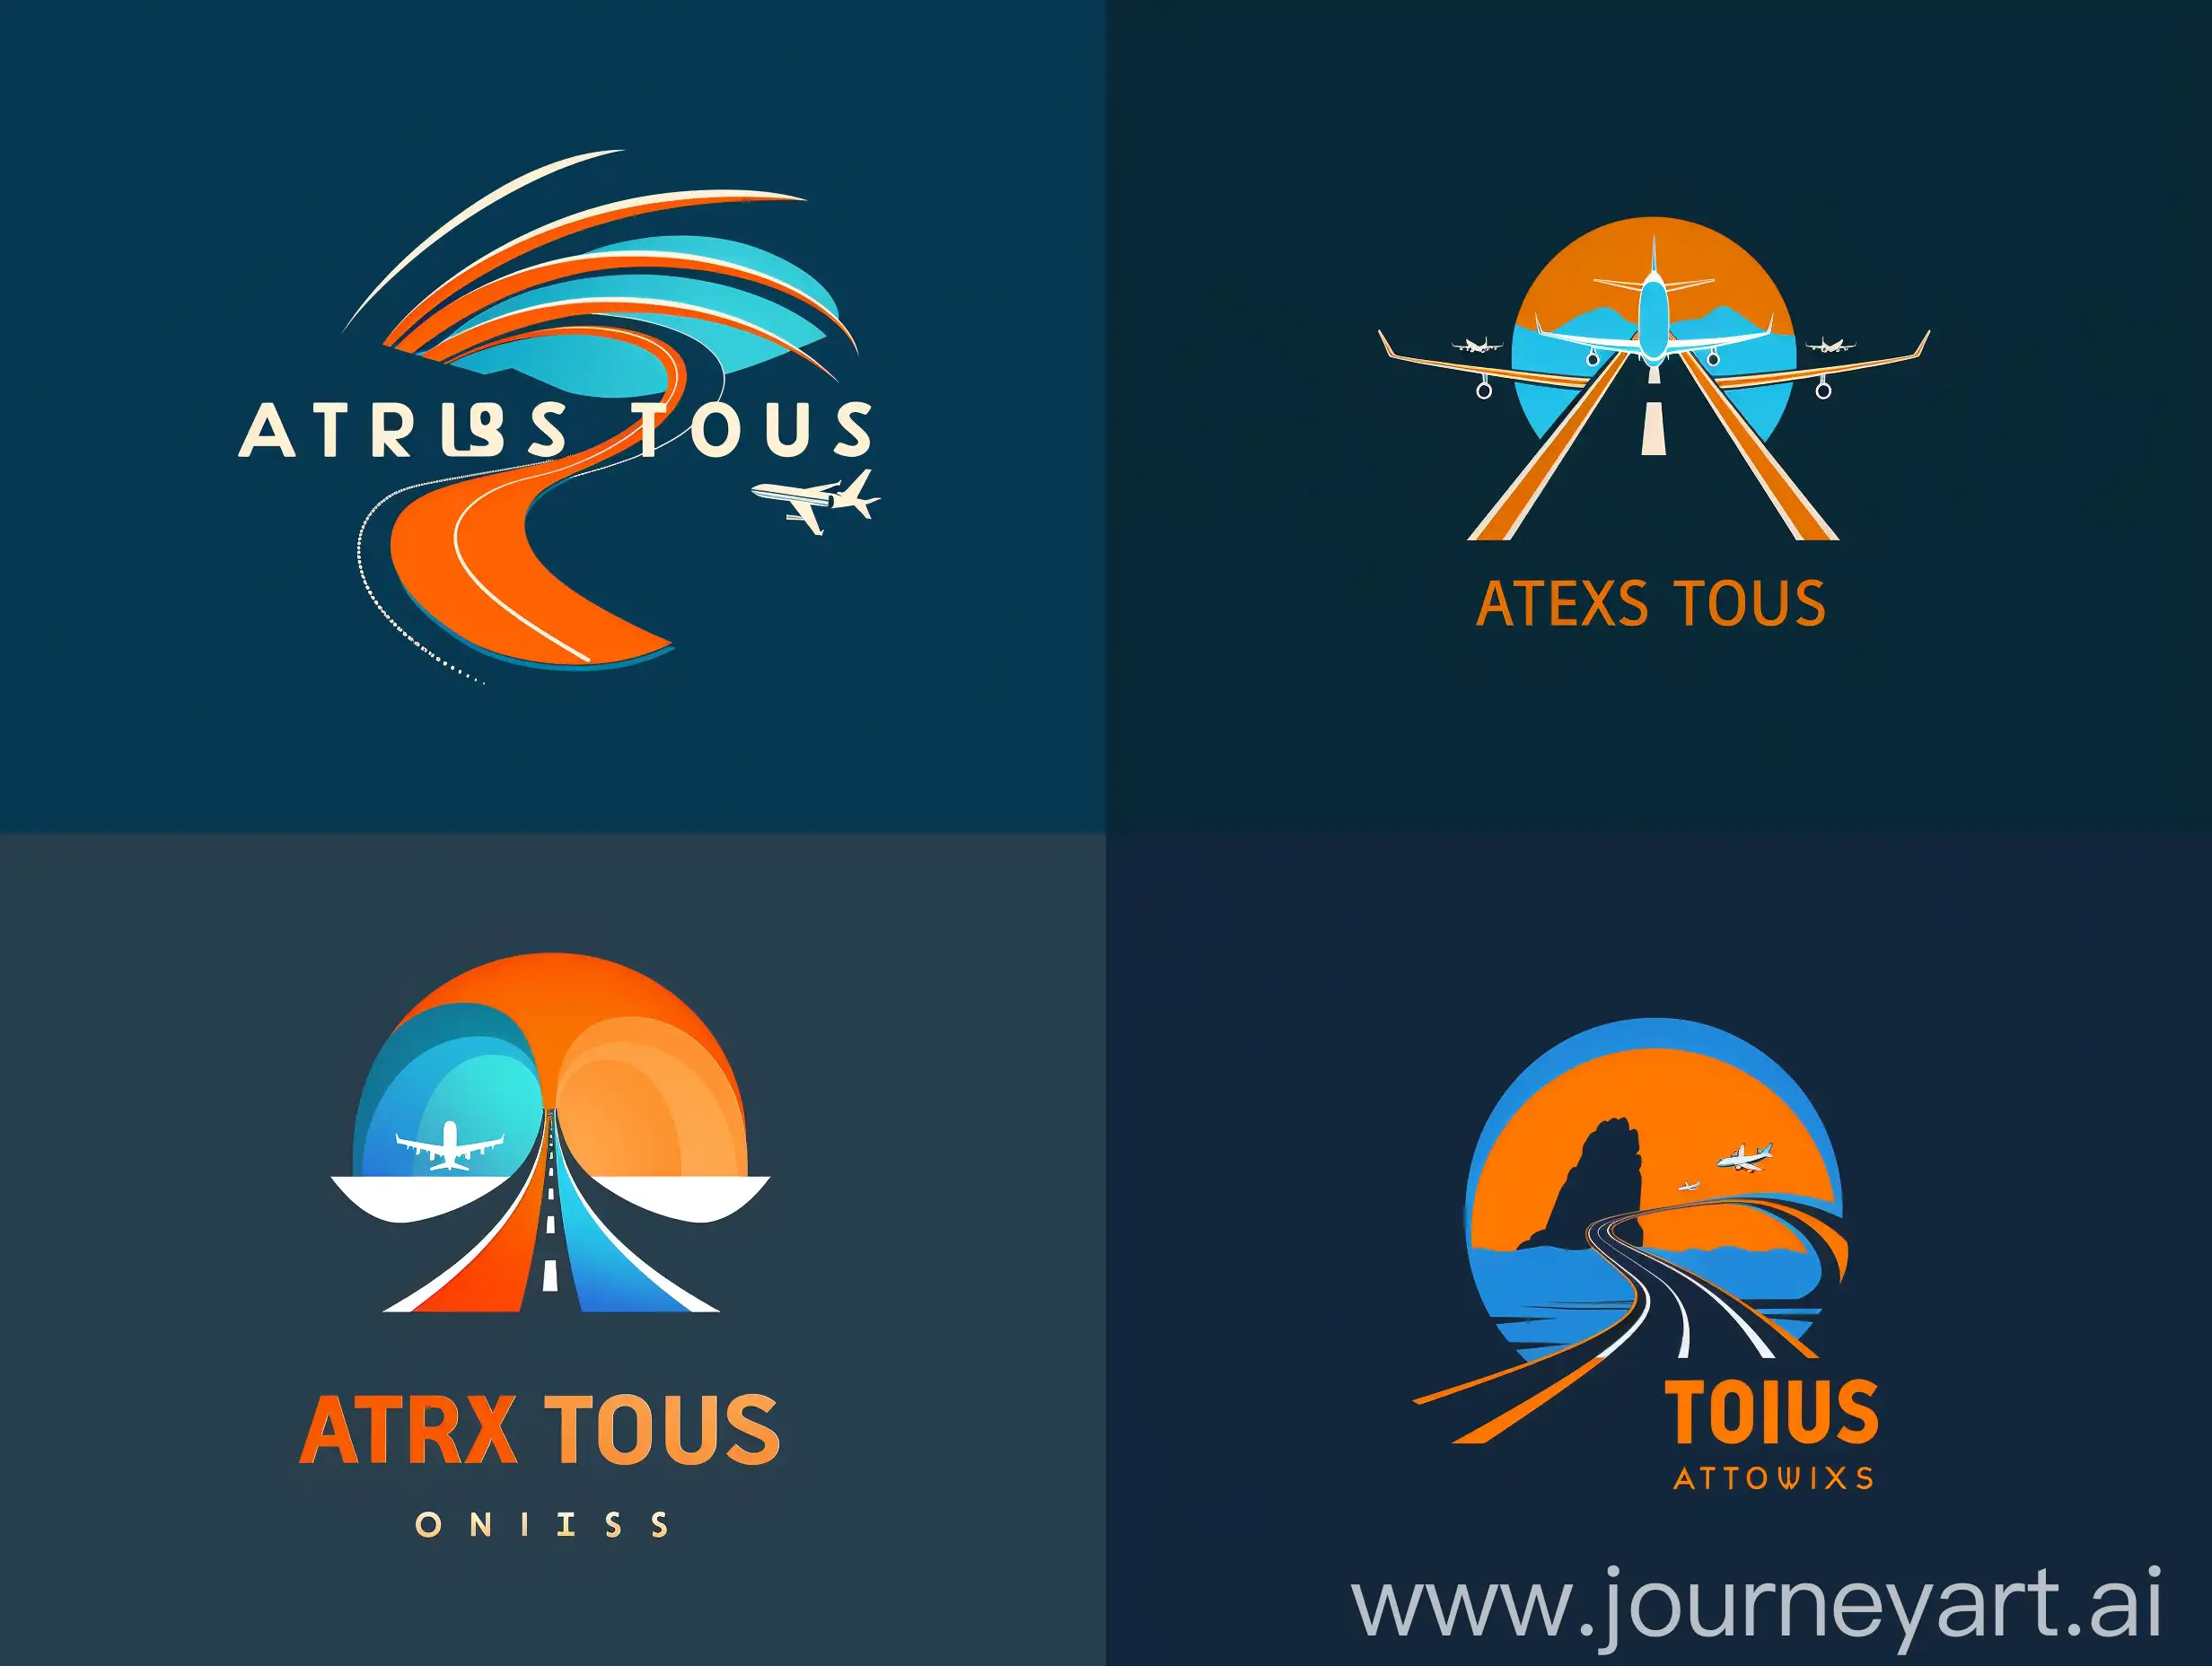 Artemis-Tours-Modern-Travel-Agency-Logo-with-Blue-and-Orange-Colors